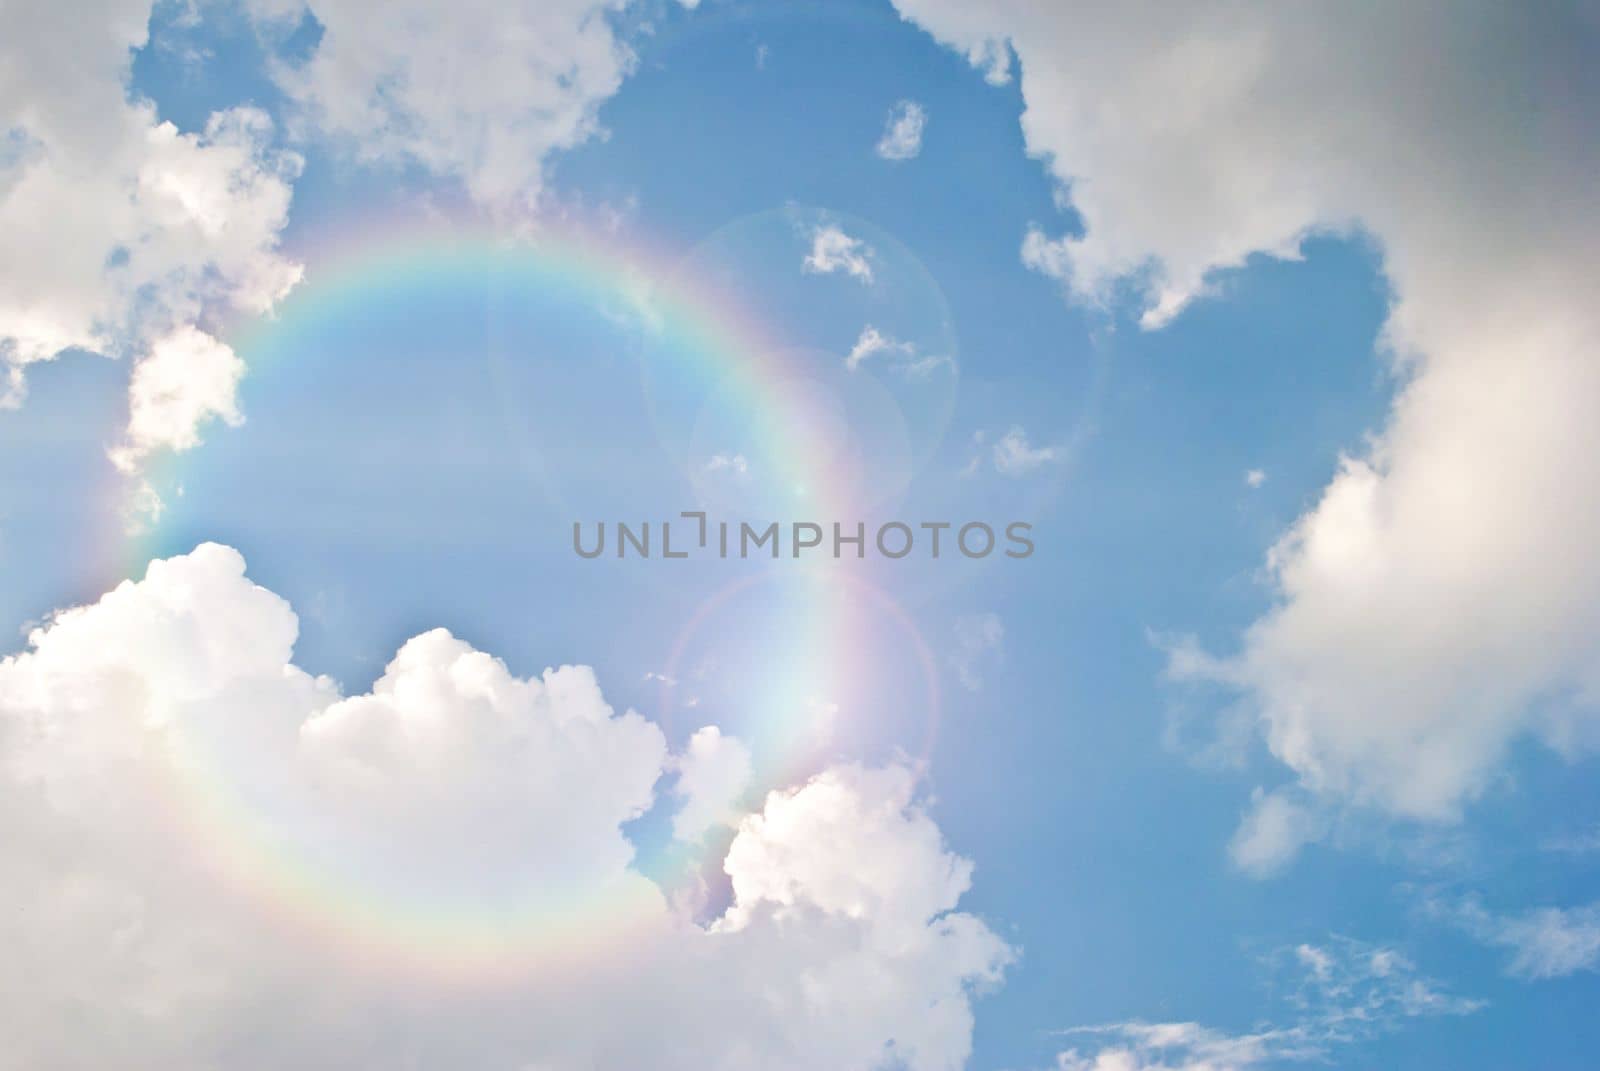 image of blue sky and white clouds with lighting flare by rakoptonLPN